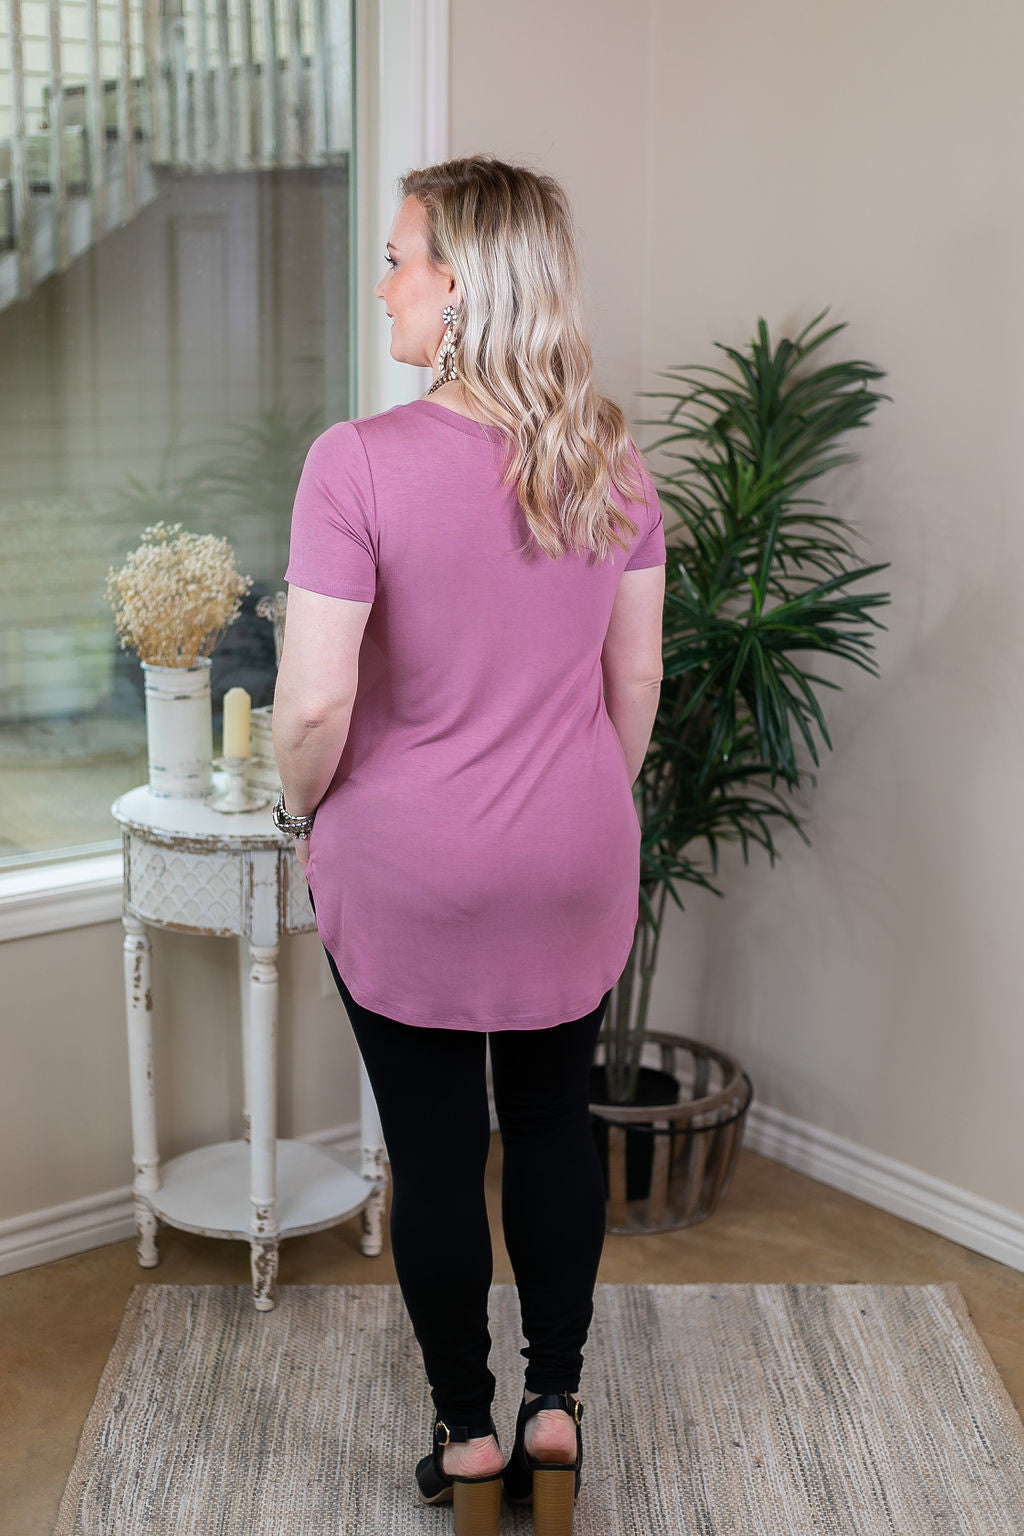 Simply The Best V Neck Short Sleeve Tee Shirt in Mauve - Giddy Up Glamour Boutique